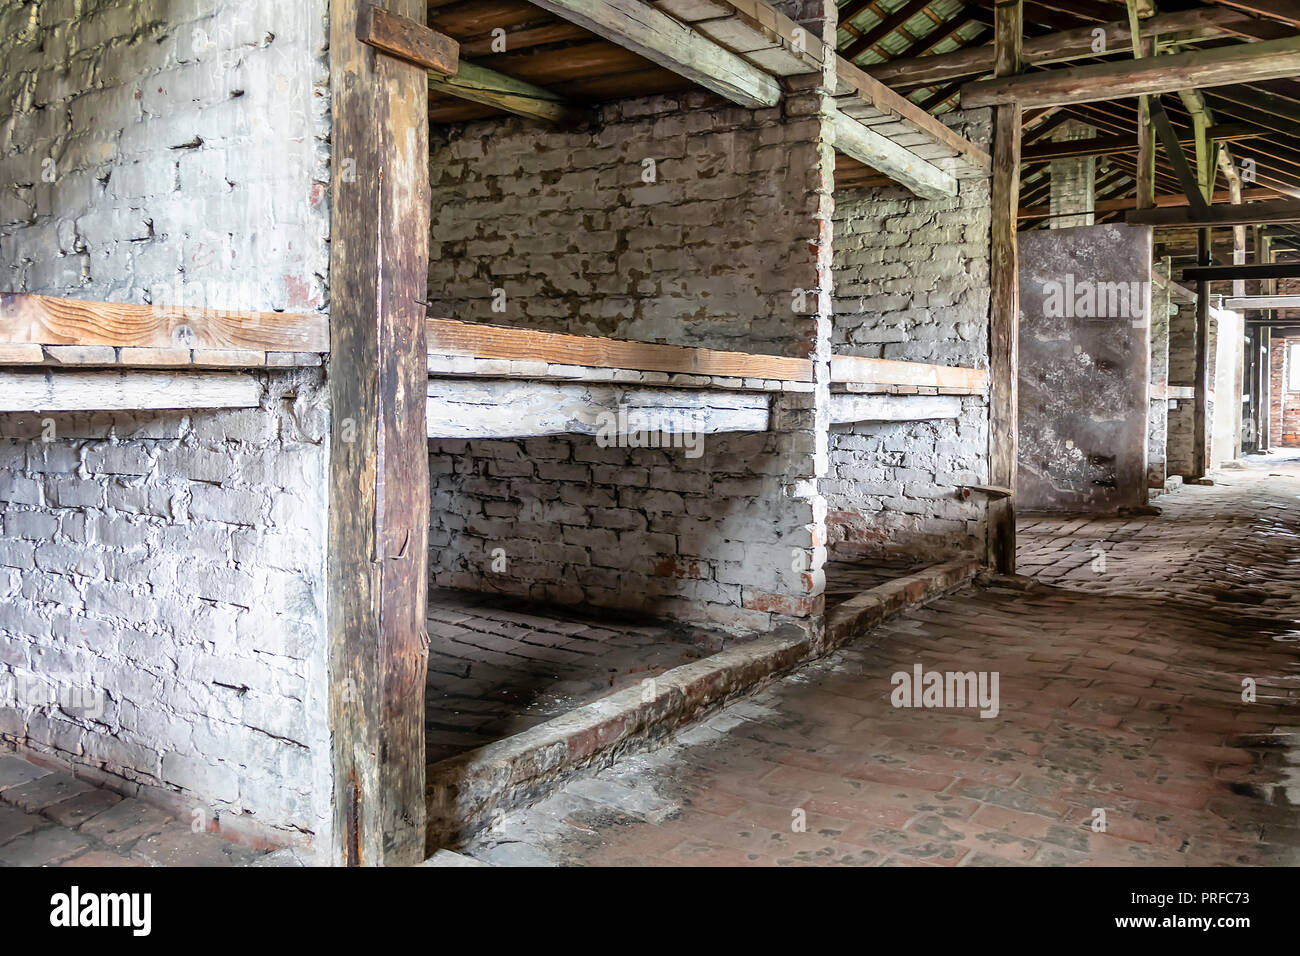 Interior of barrack with Prisoner's beds, bunks inside barrack in Auschwitz  Birkenau. Nazi concentration camp Auschwitz II, built and operated by the  Stock Photo - Alamy